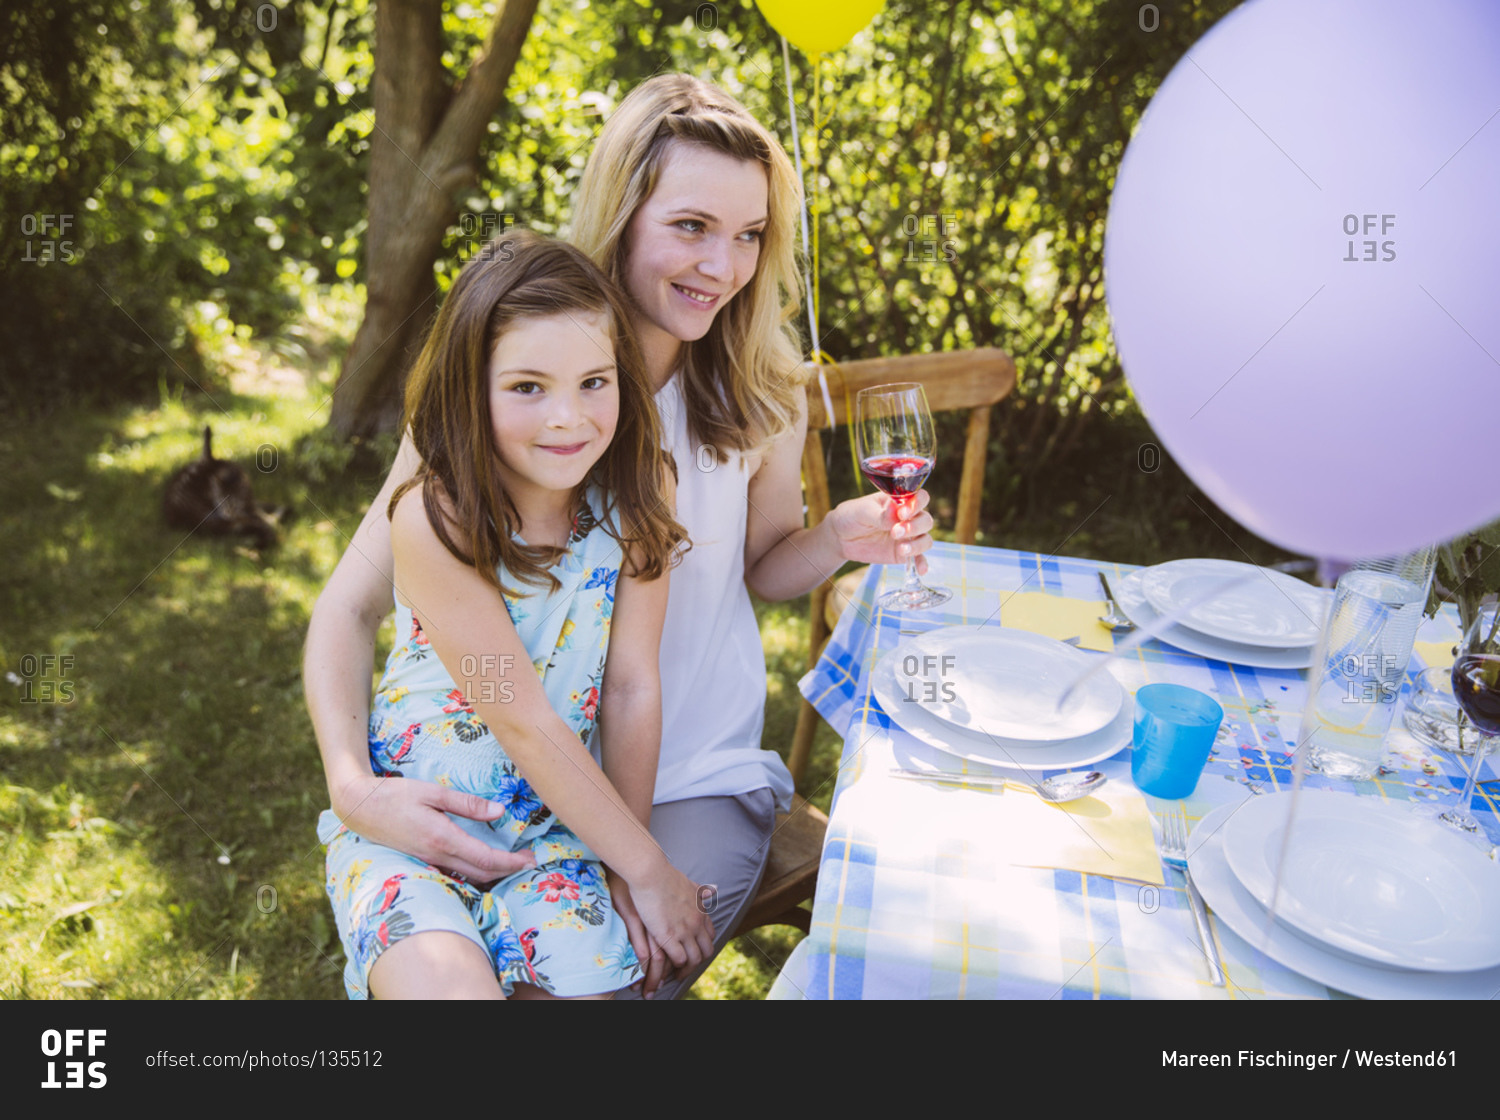 Daughter sitting on mother's lap at garden party table